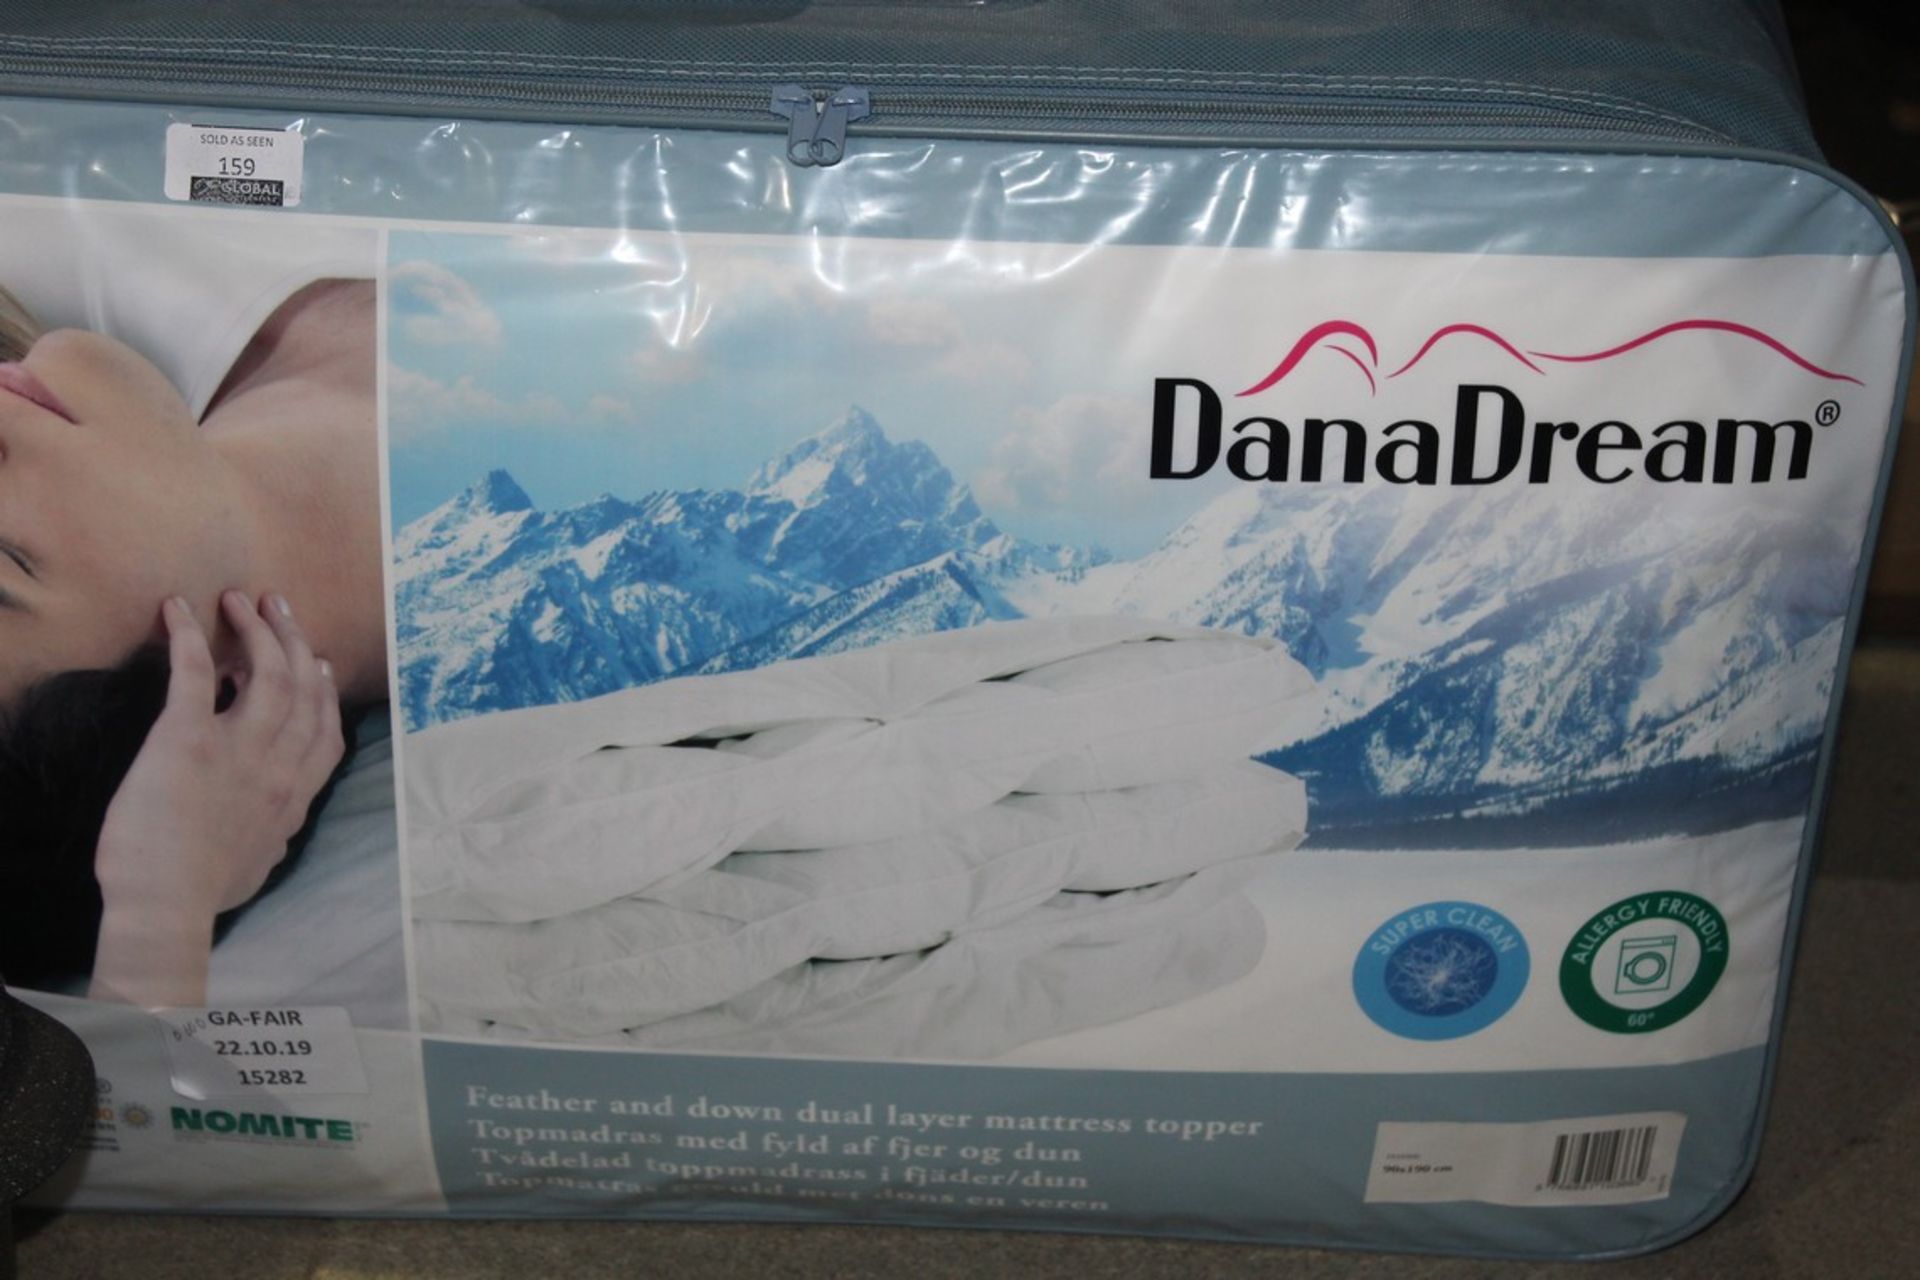 Darna Dream Feather and Down Dual Layer Mattress Topper RRP £60 (15282) (Public Viewing and